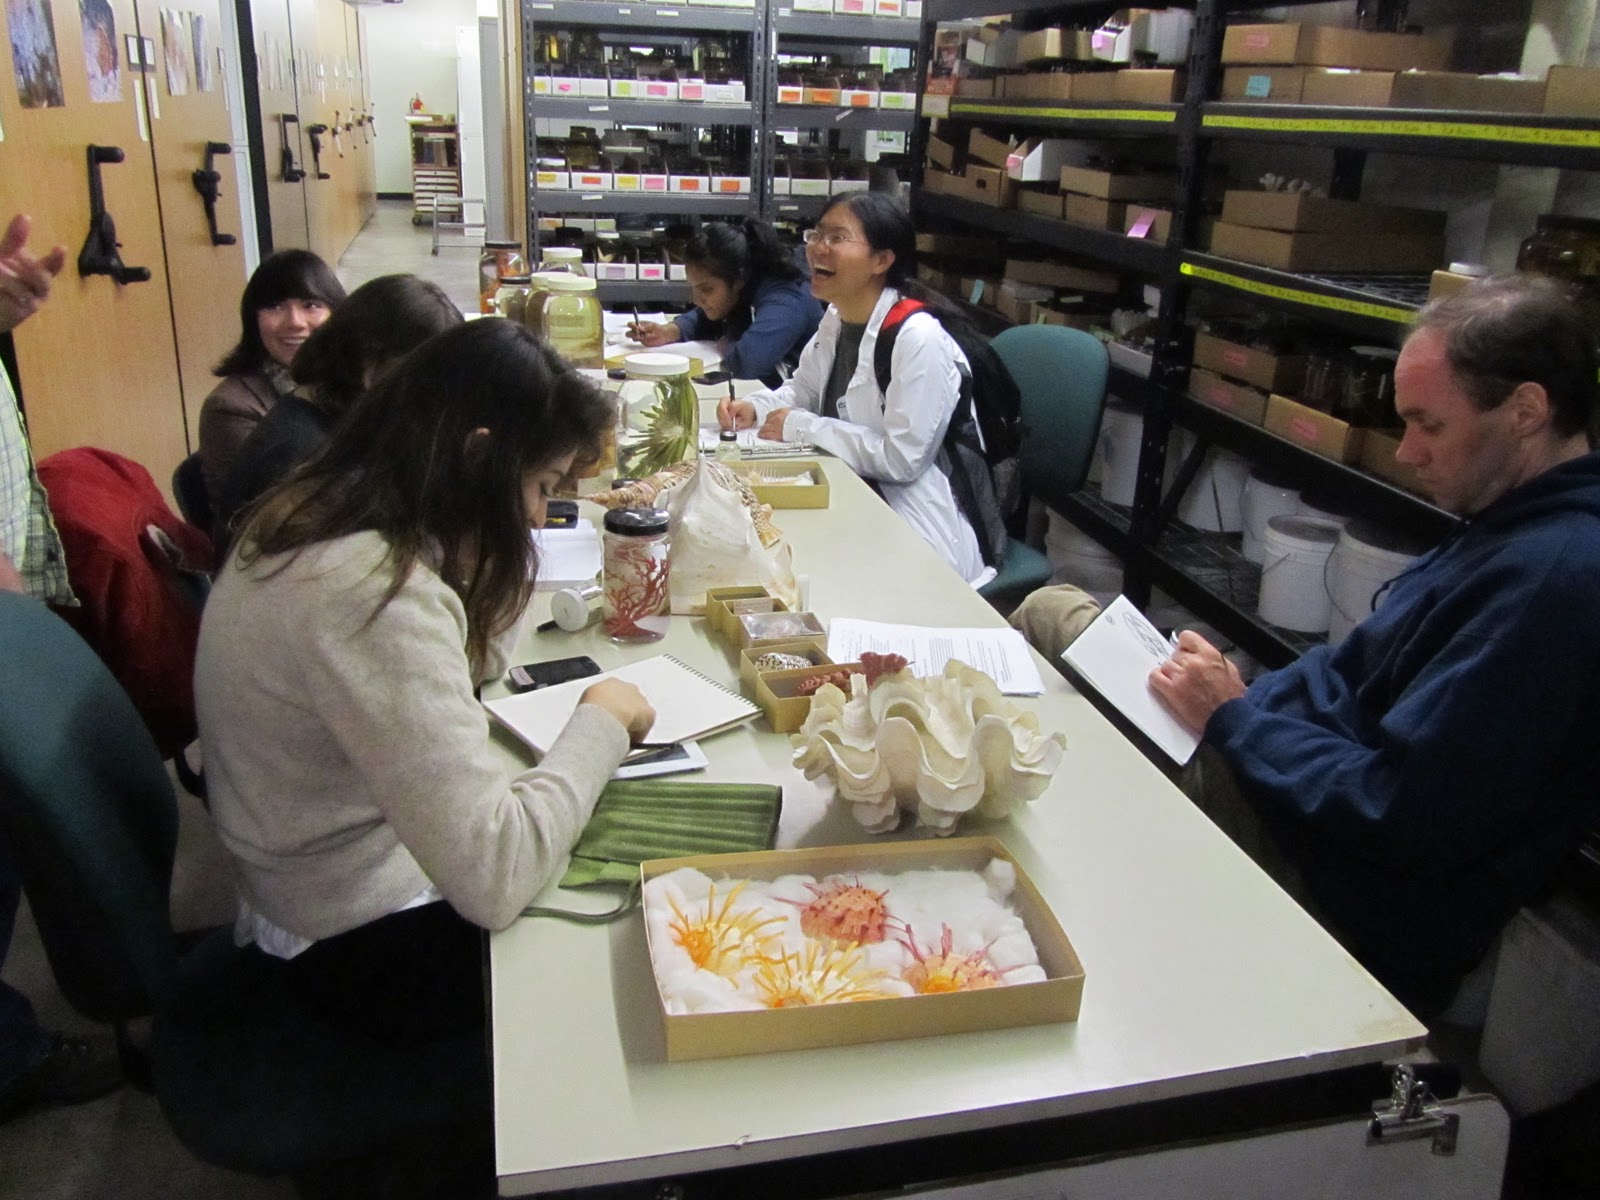 art students gathered around a table in the range with some attractive specimens including a giant clam and some yellow and orange spiked bivalves